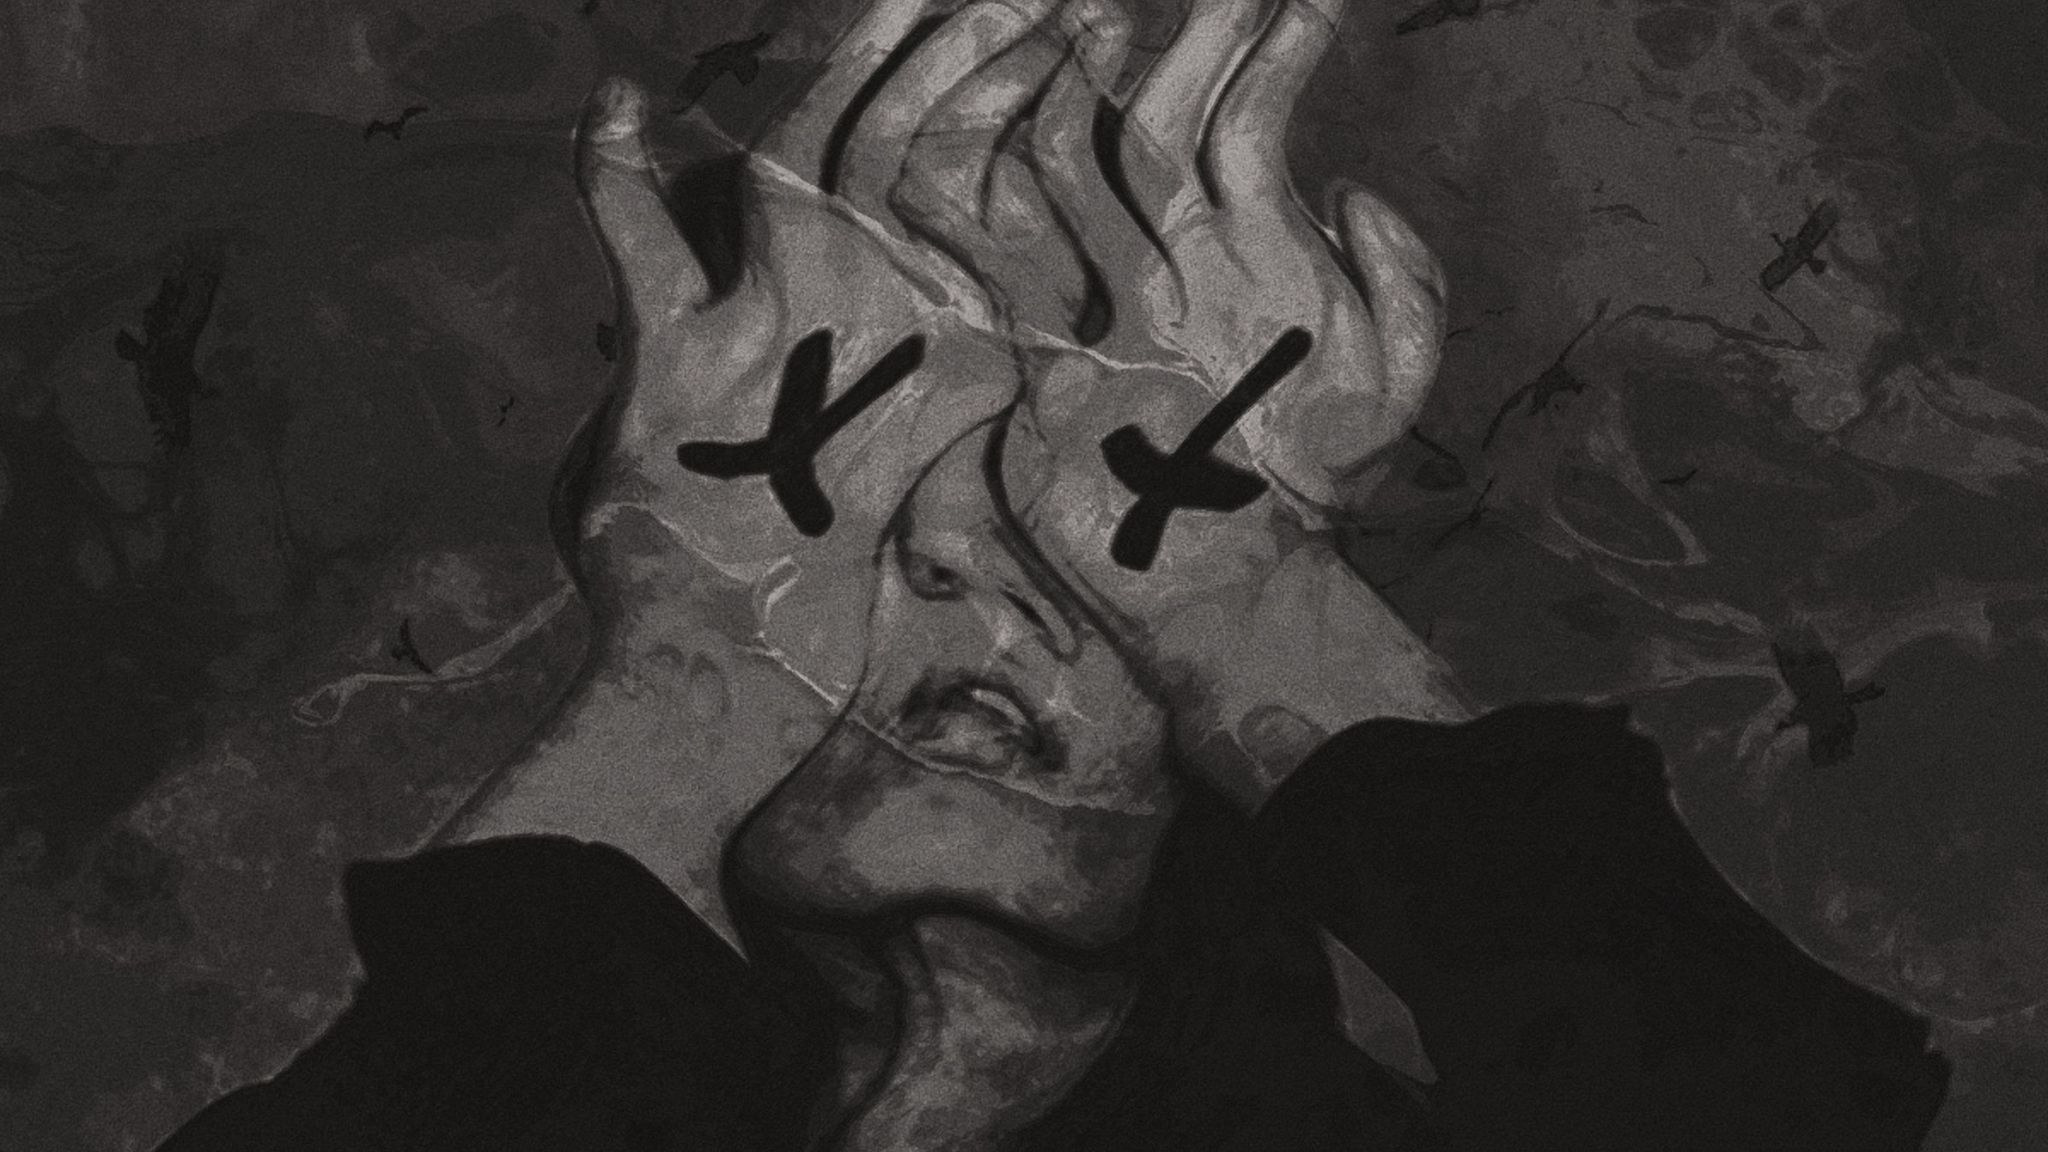 A black and white image of a face with hands covering the eyes and the word 